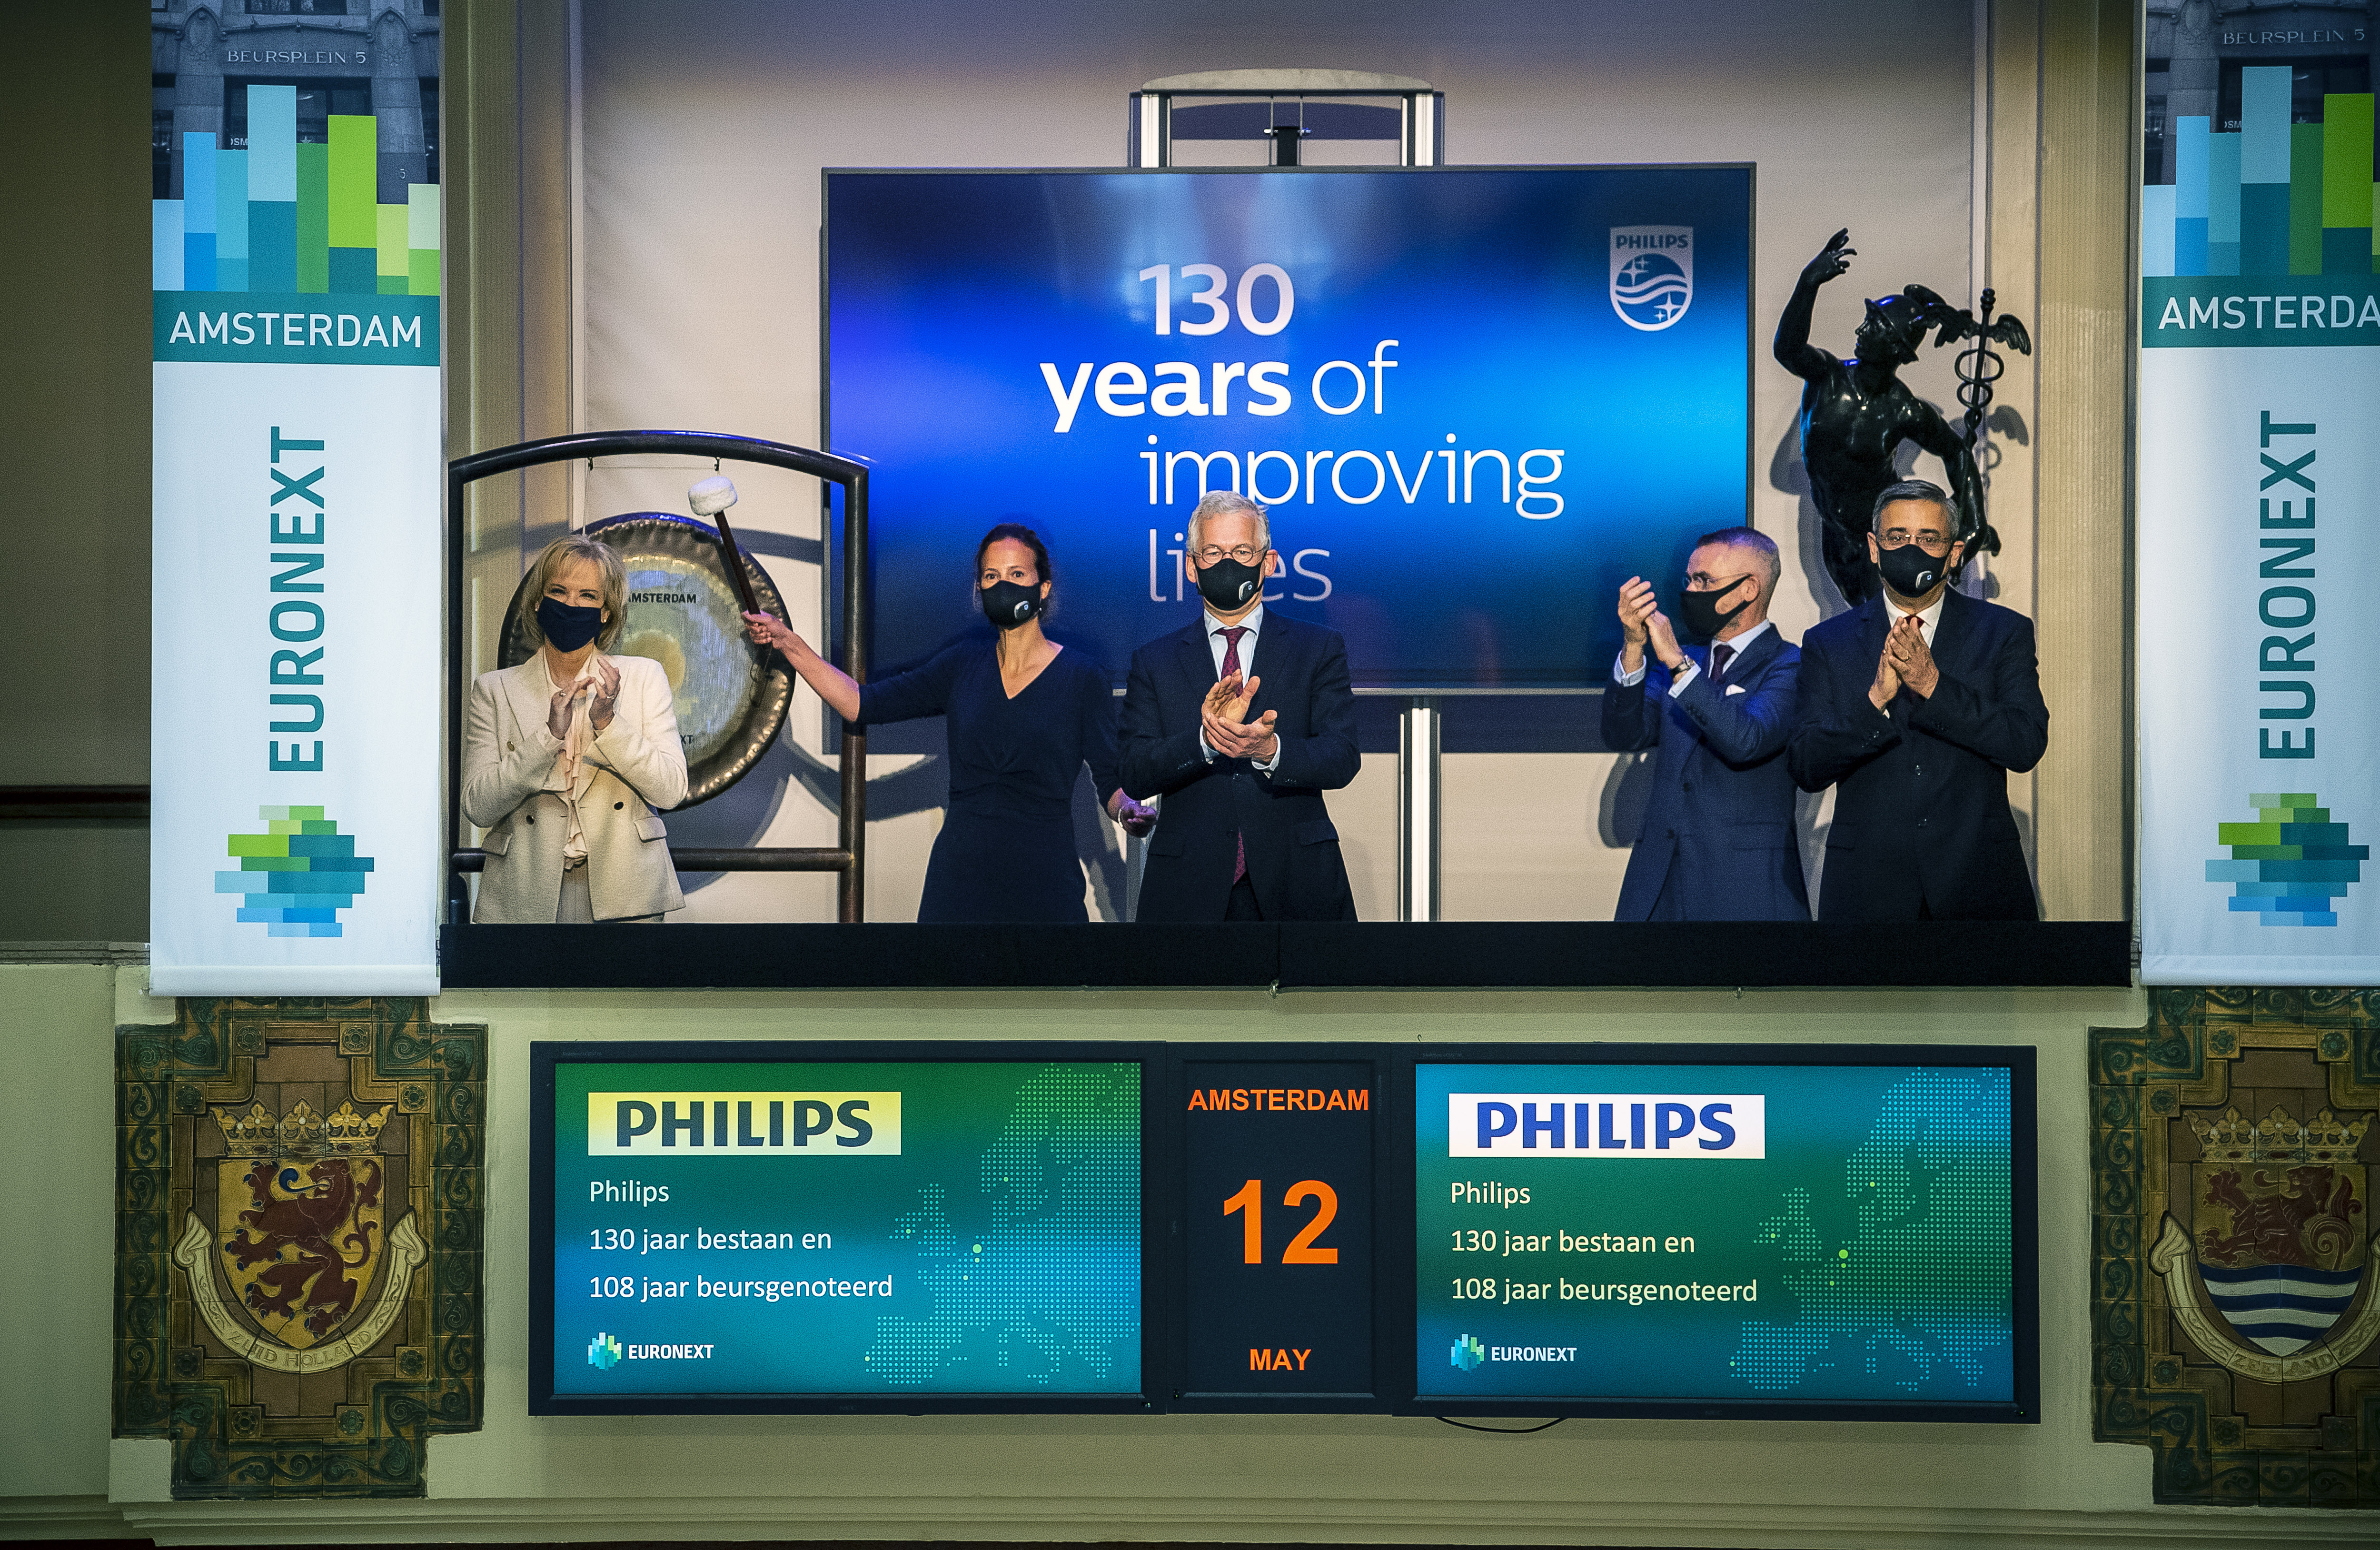 To celebrate 130 years of Philips Frans van Houten, CEO of Philips, opened the Euronext Amsterdam Stock Exchange this morning